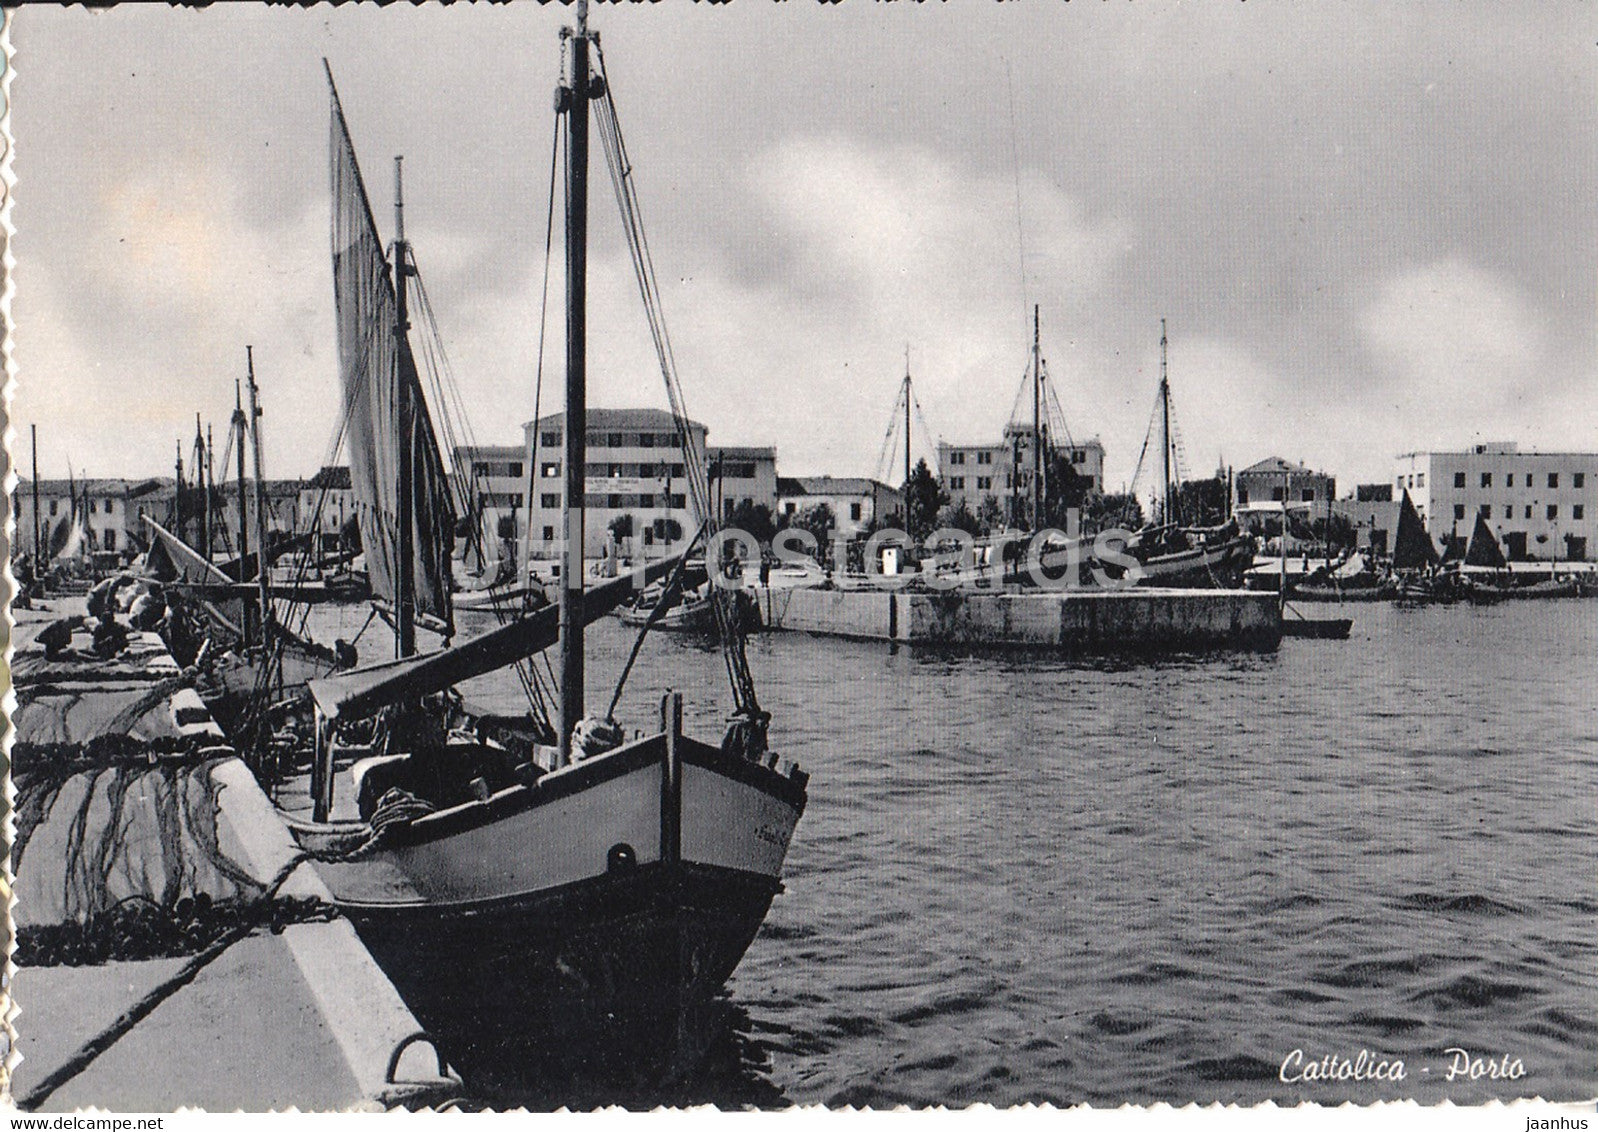 Cattolica - Porto - port - sailing boat - old postcard - 1950s - Italy - used - JH Postcards